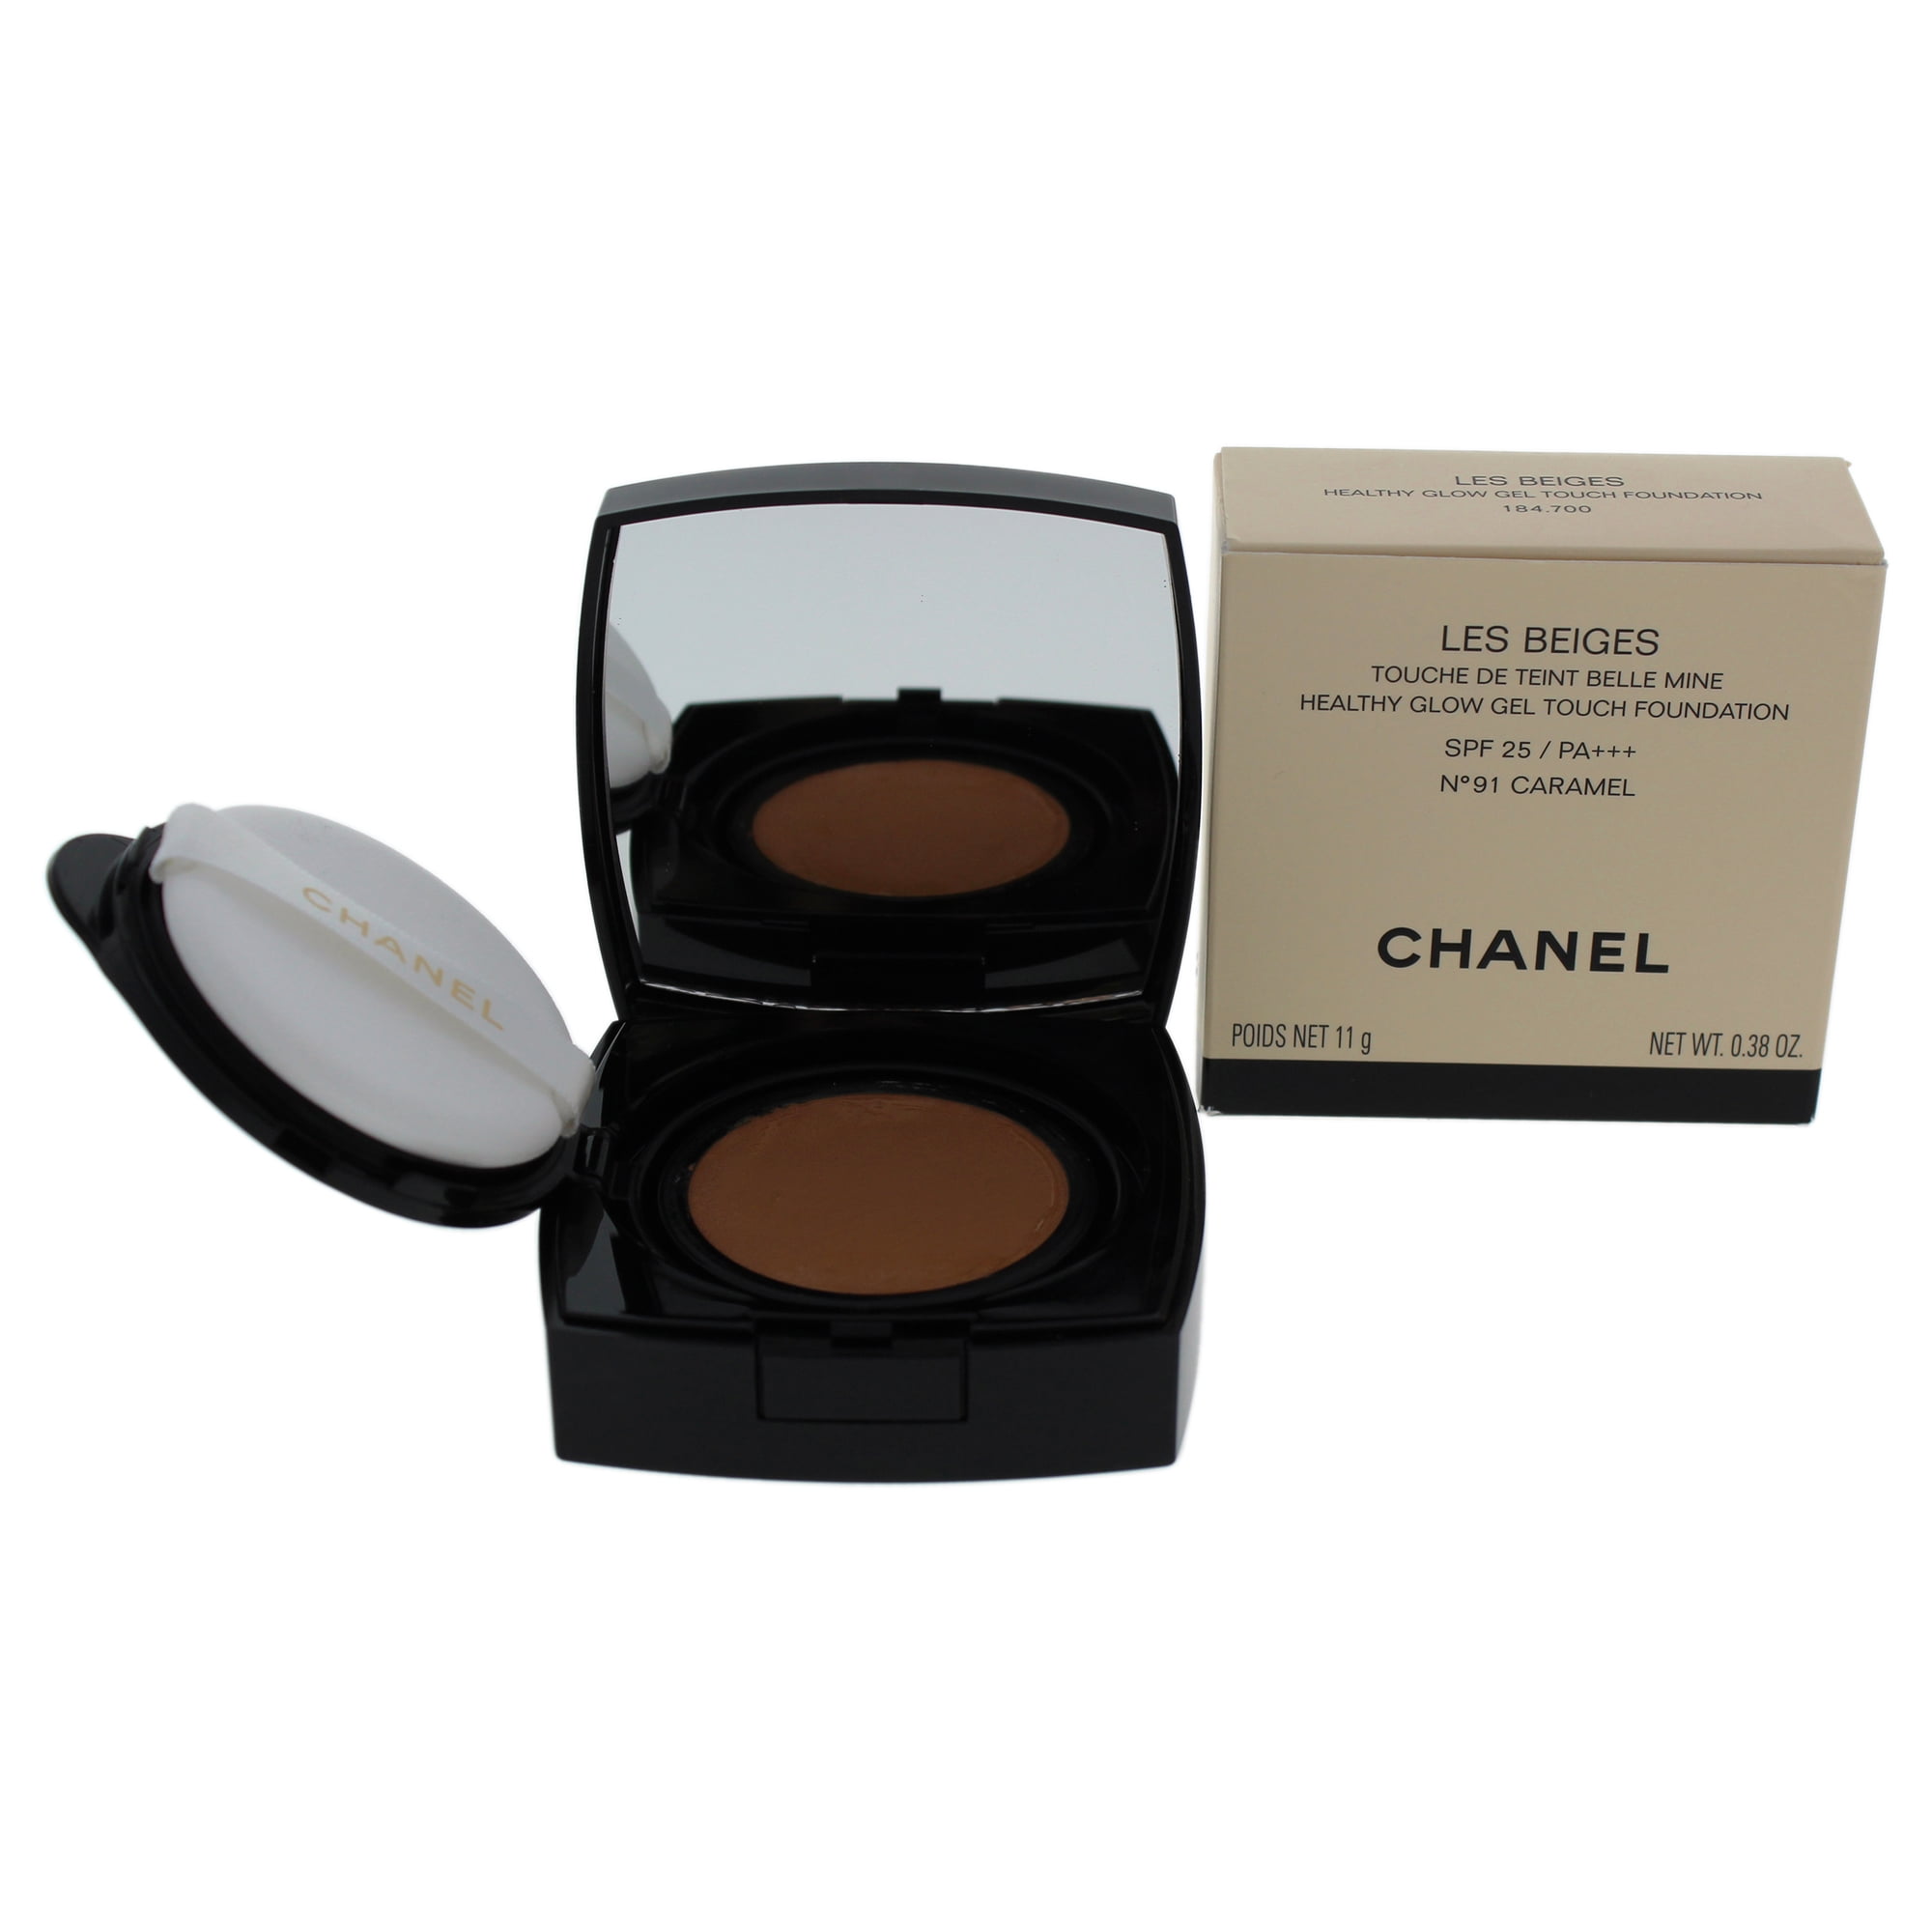 Les Beiges Healthy Glow Gel Touch Foundation SPF 25 - # 91 Caramel by  Chanel for Women - 0.38 oz Foundation